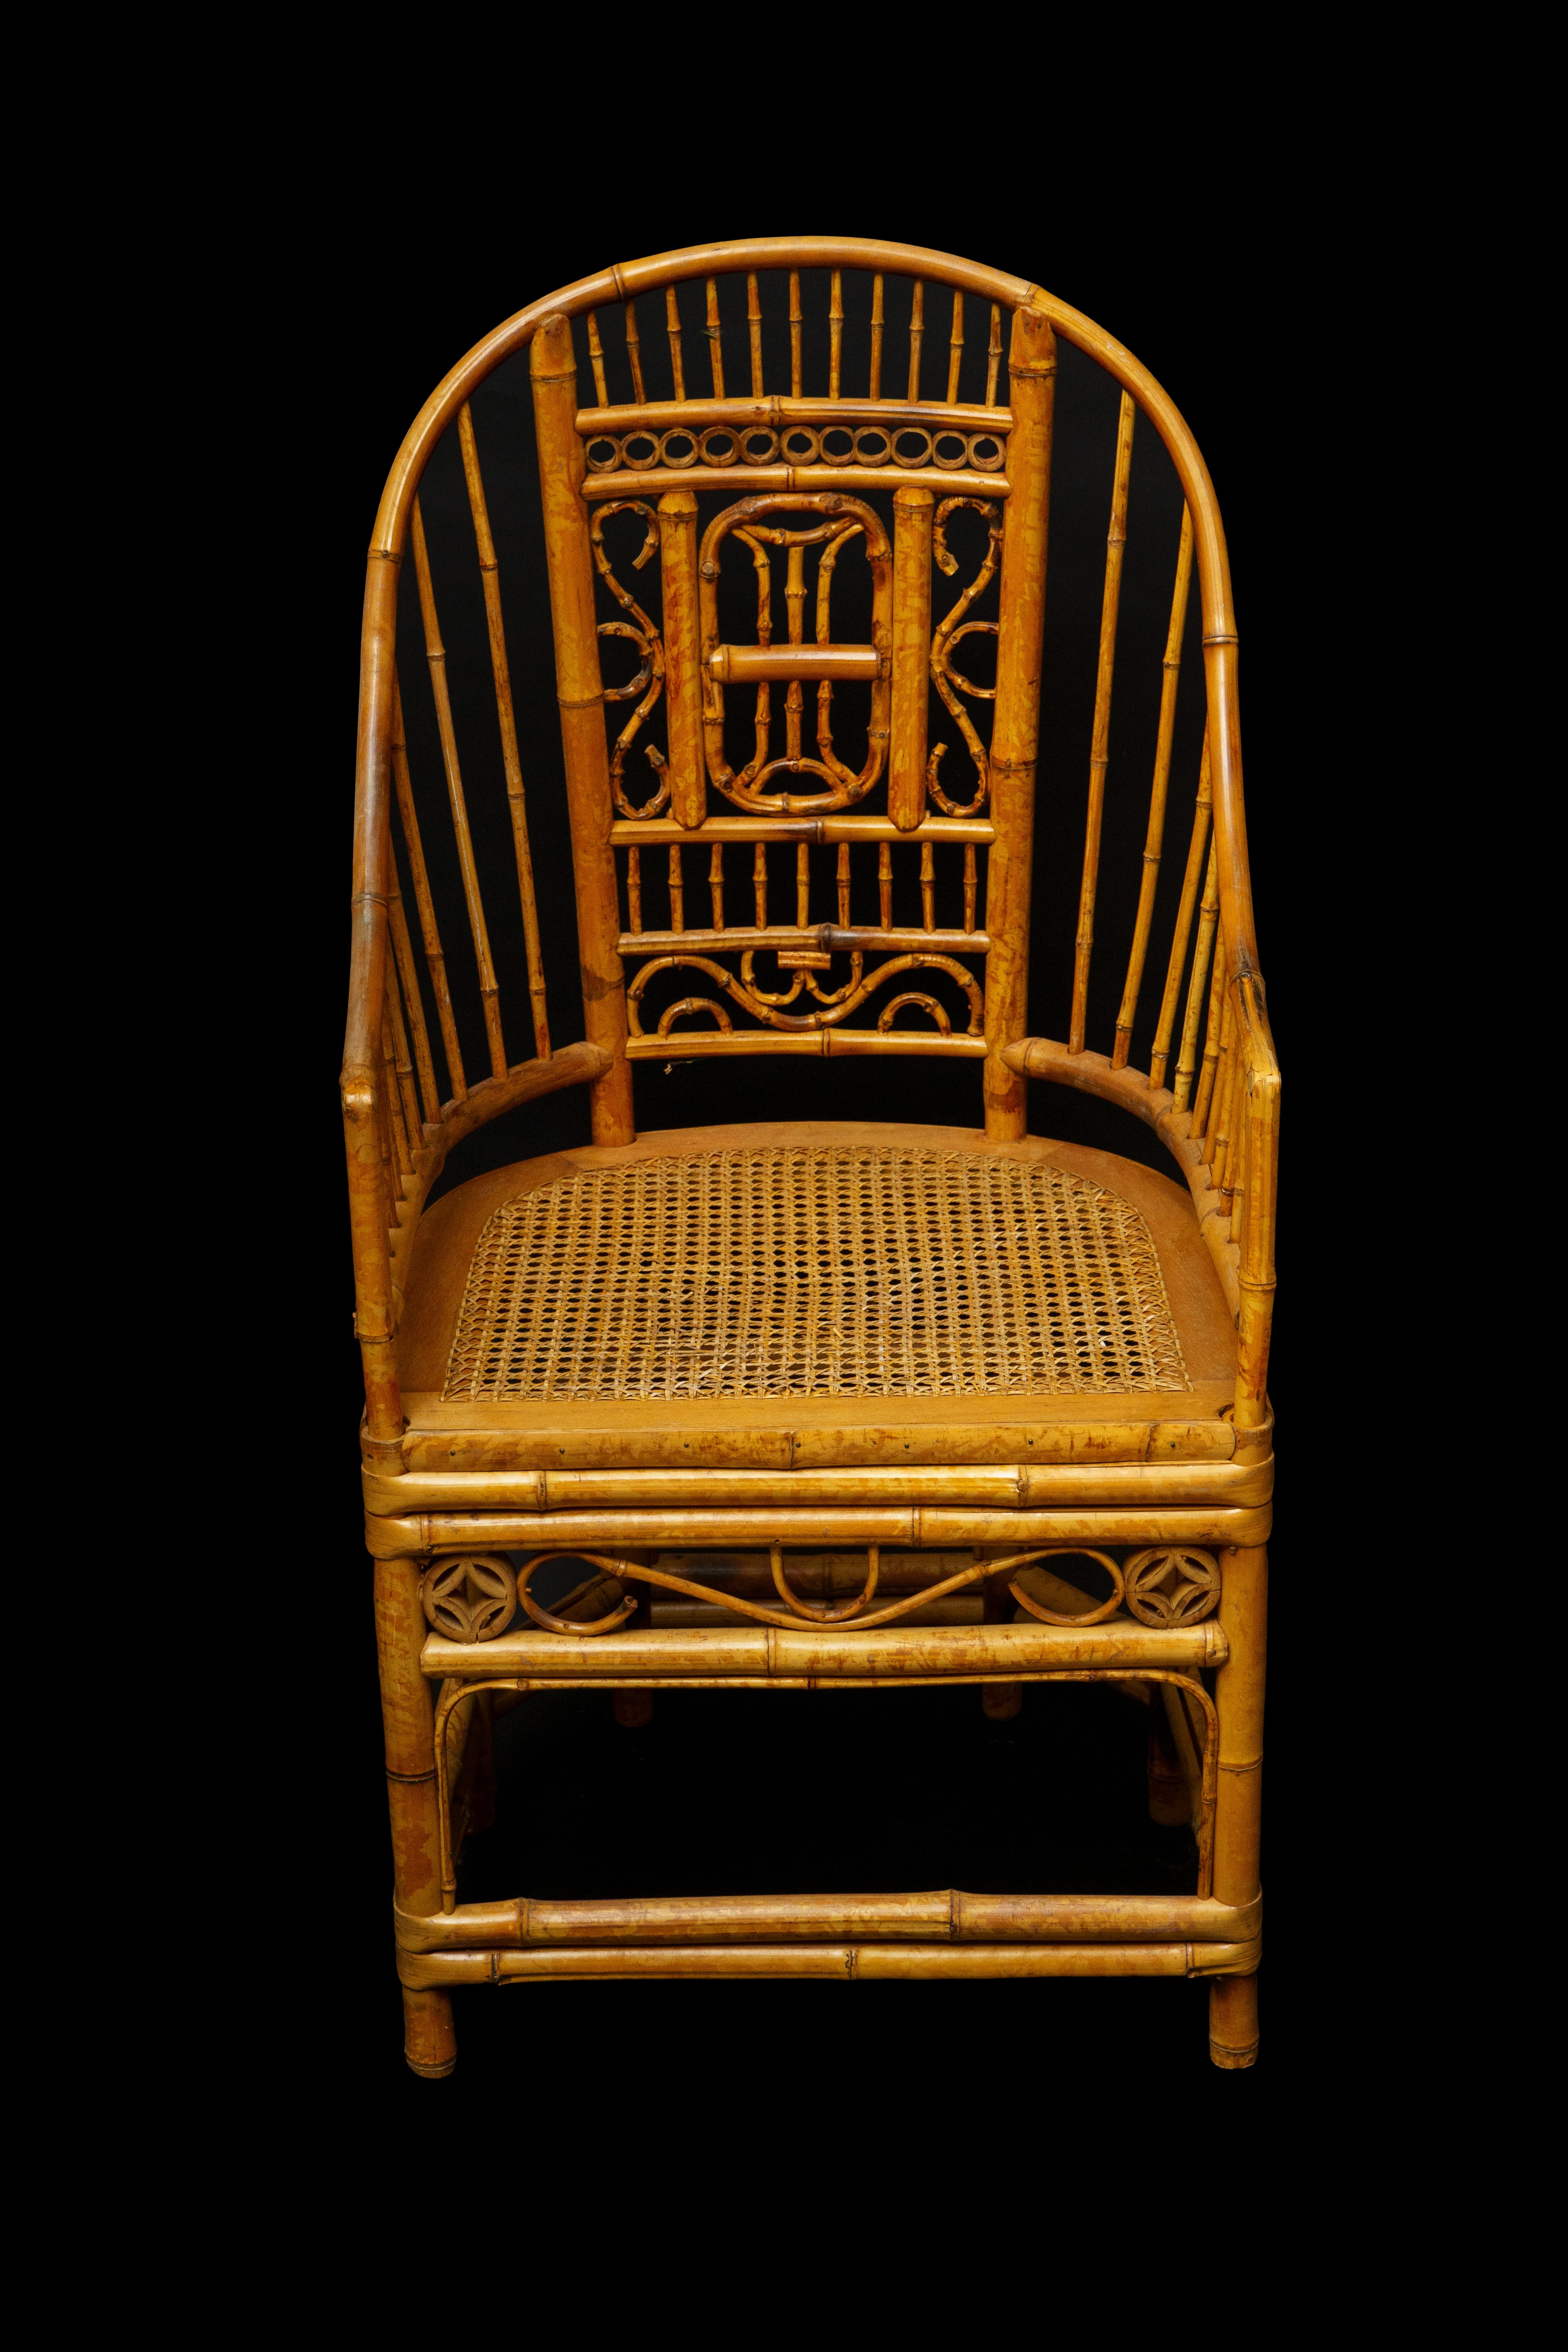 Vintage bamboo arm chair w/ caned seat:

Measures: 22